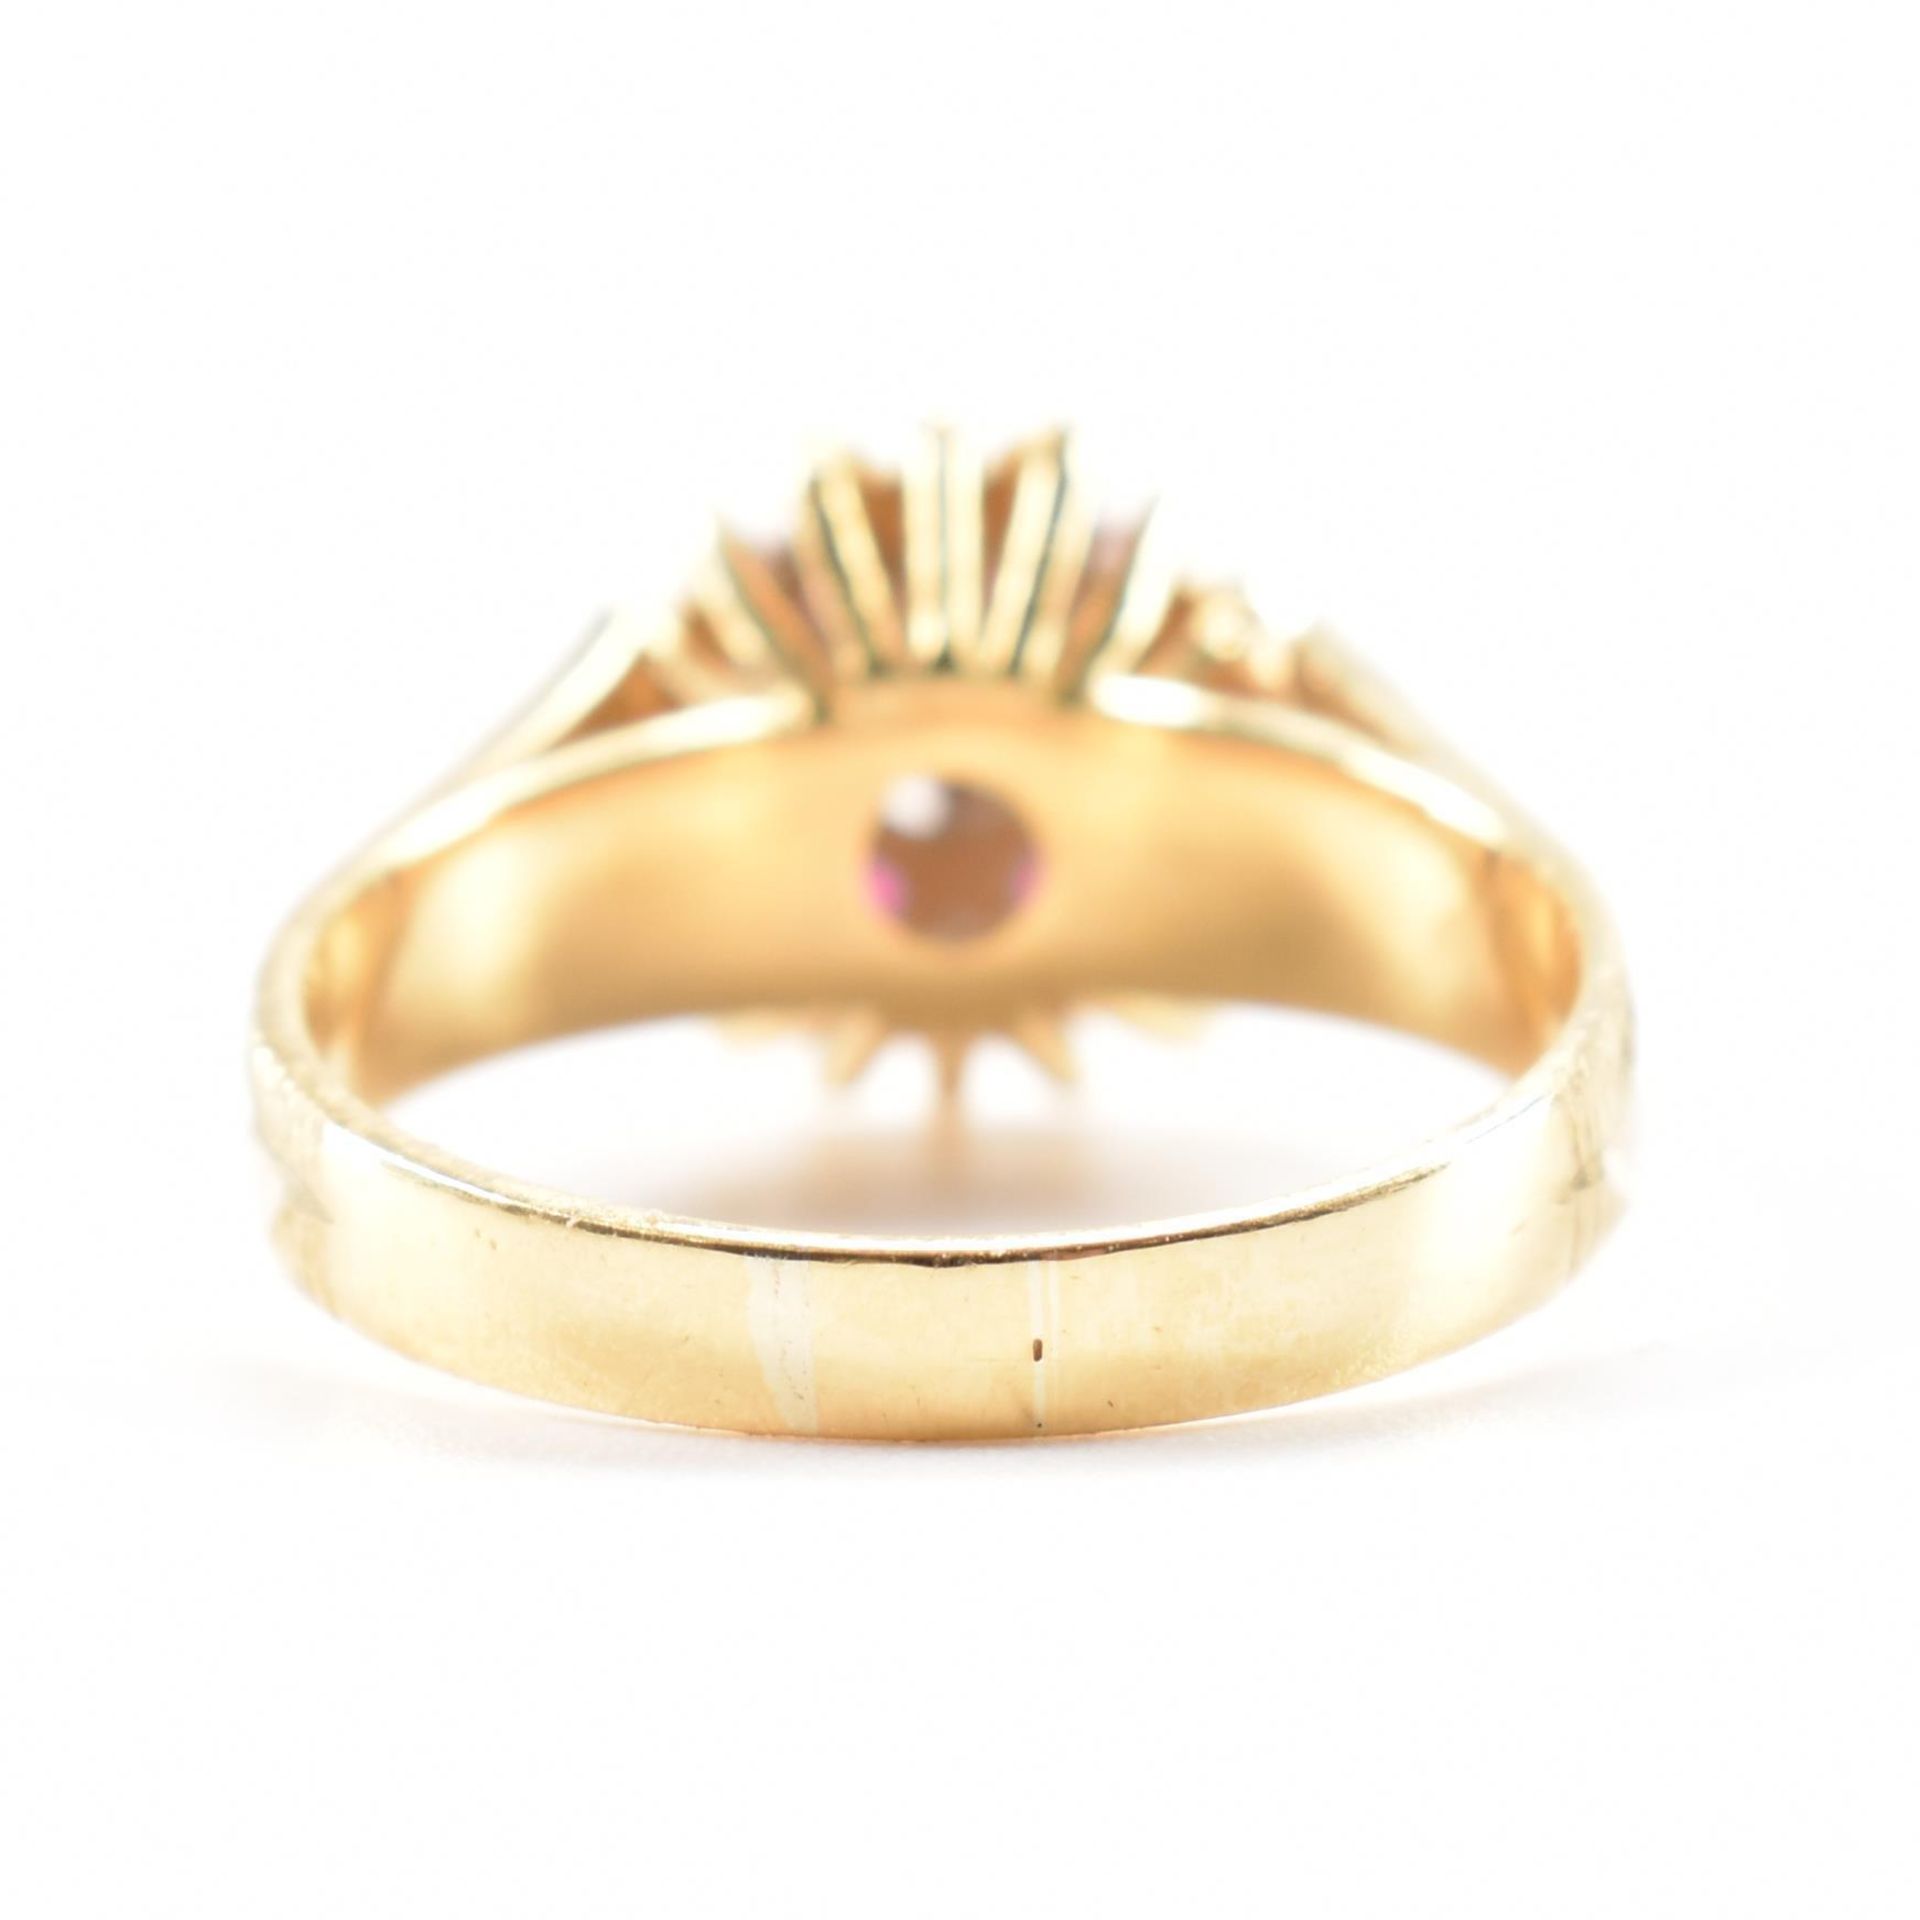 VINTAGE GOLD RUBY & DIAMOND CLUSTER RING - Image 3 of 8